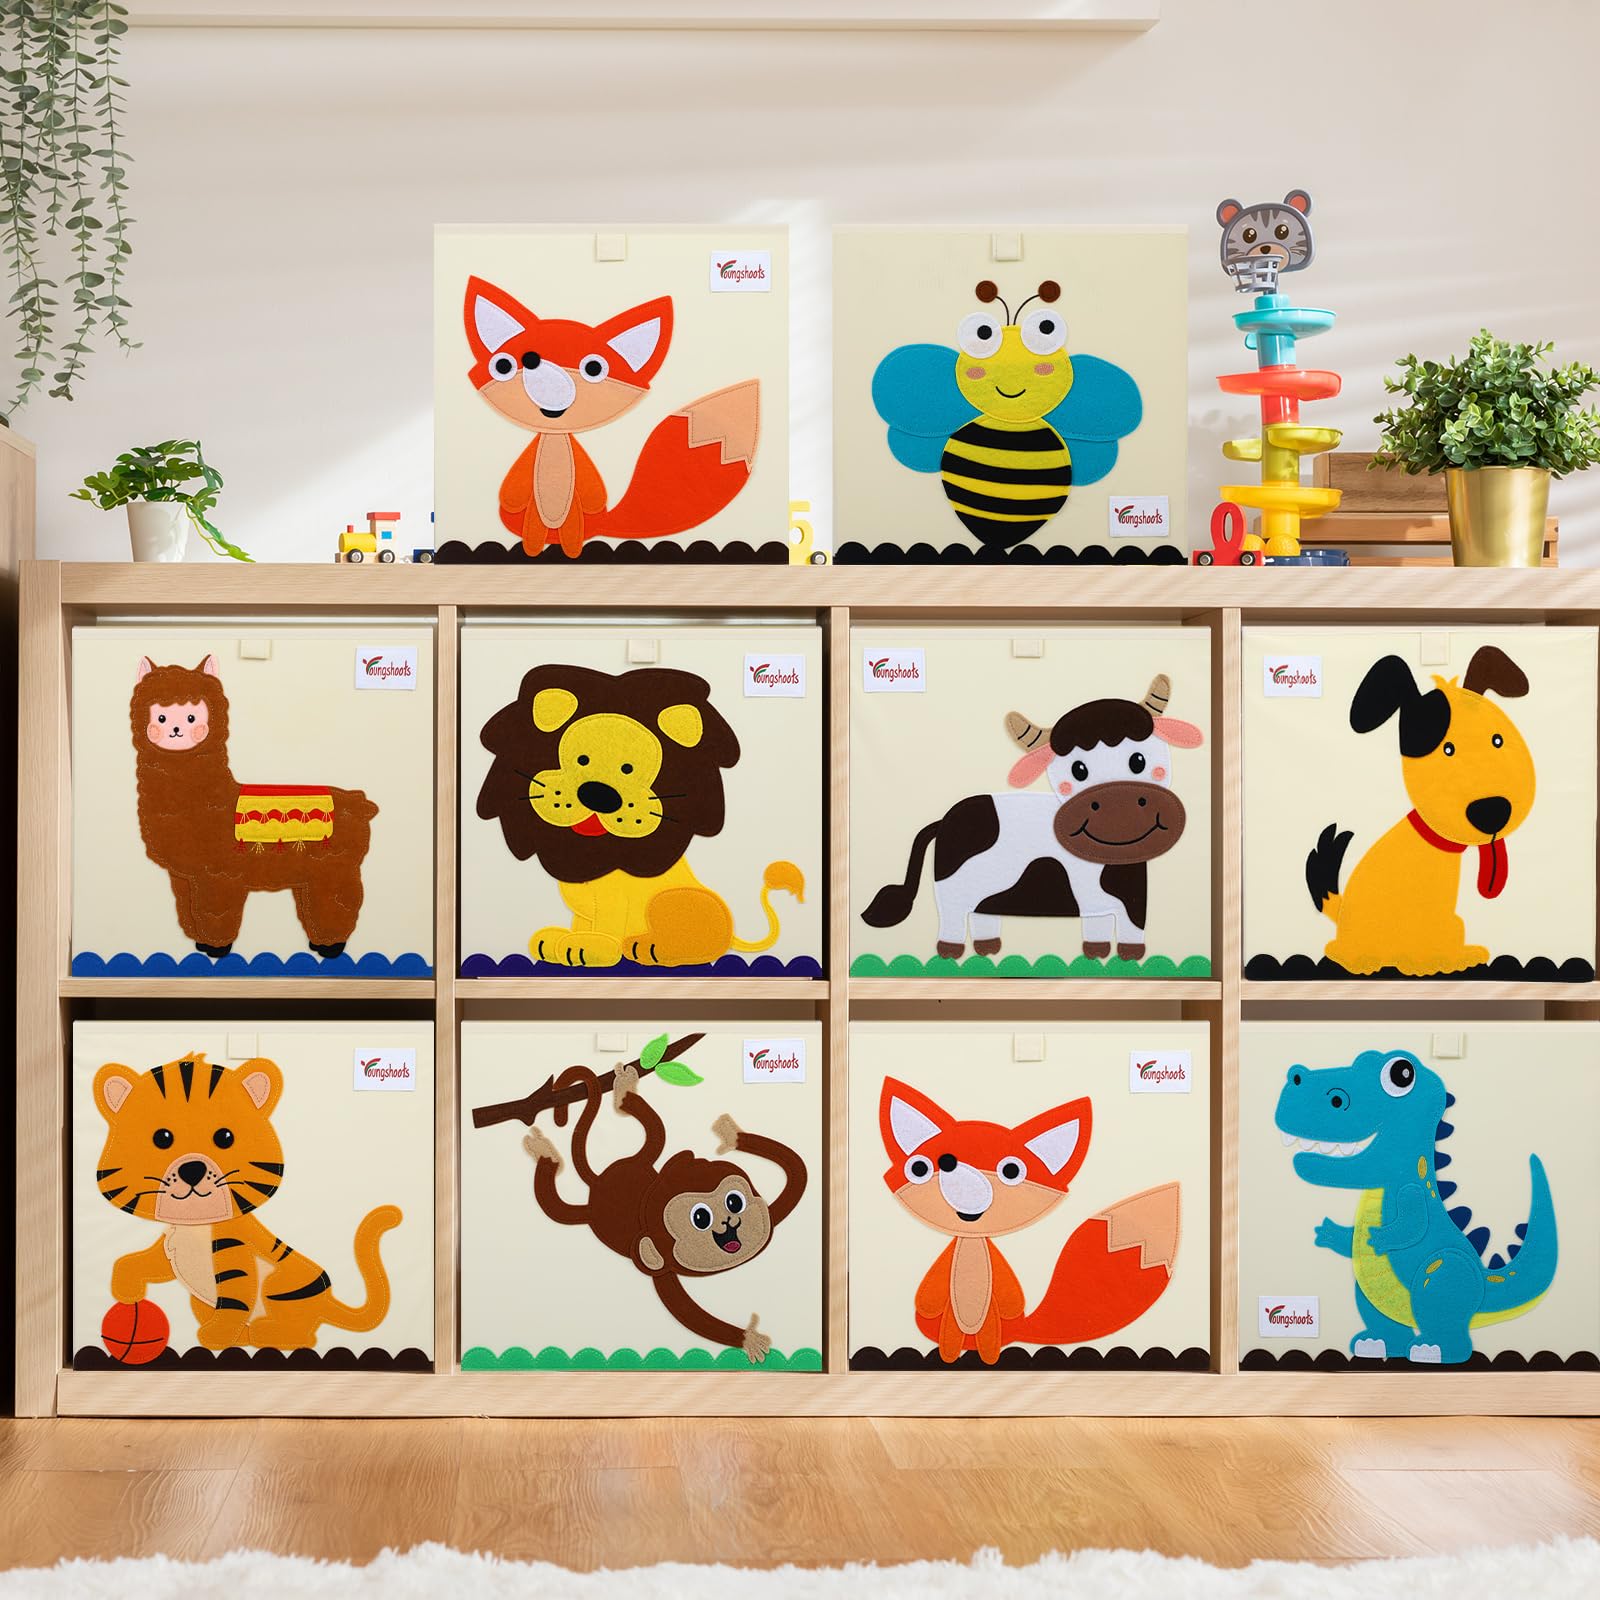 Mumufy 12 Pcs 13 Inch Foldable Dinosaur Toy Storage Cubes Animal Organizer Bins Fabric Toy Box Chest Basket Container for Toddlers Kids Boys and Girls Nursery Playroom, 13 x 13 x 13 Inch